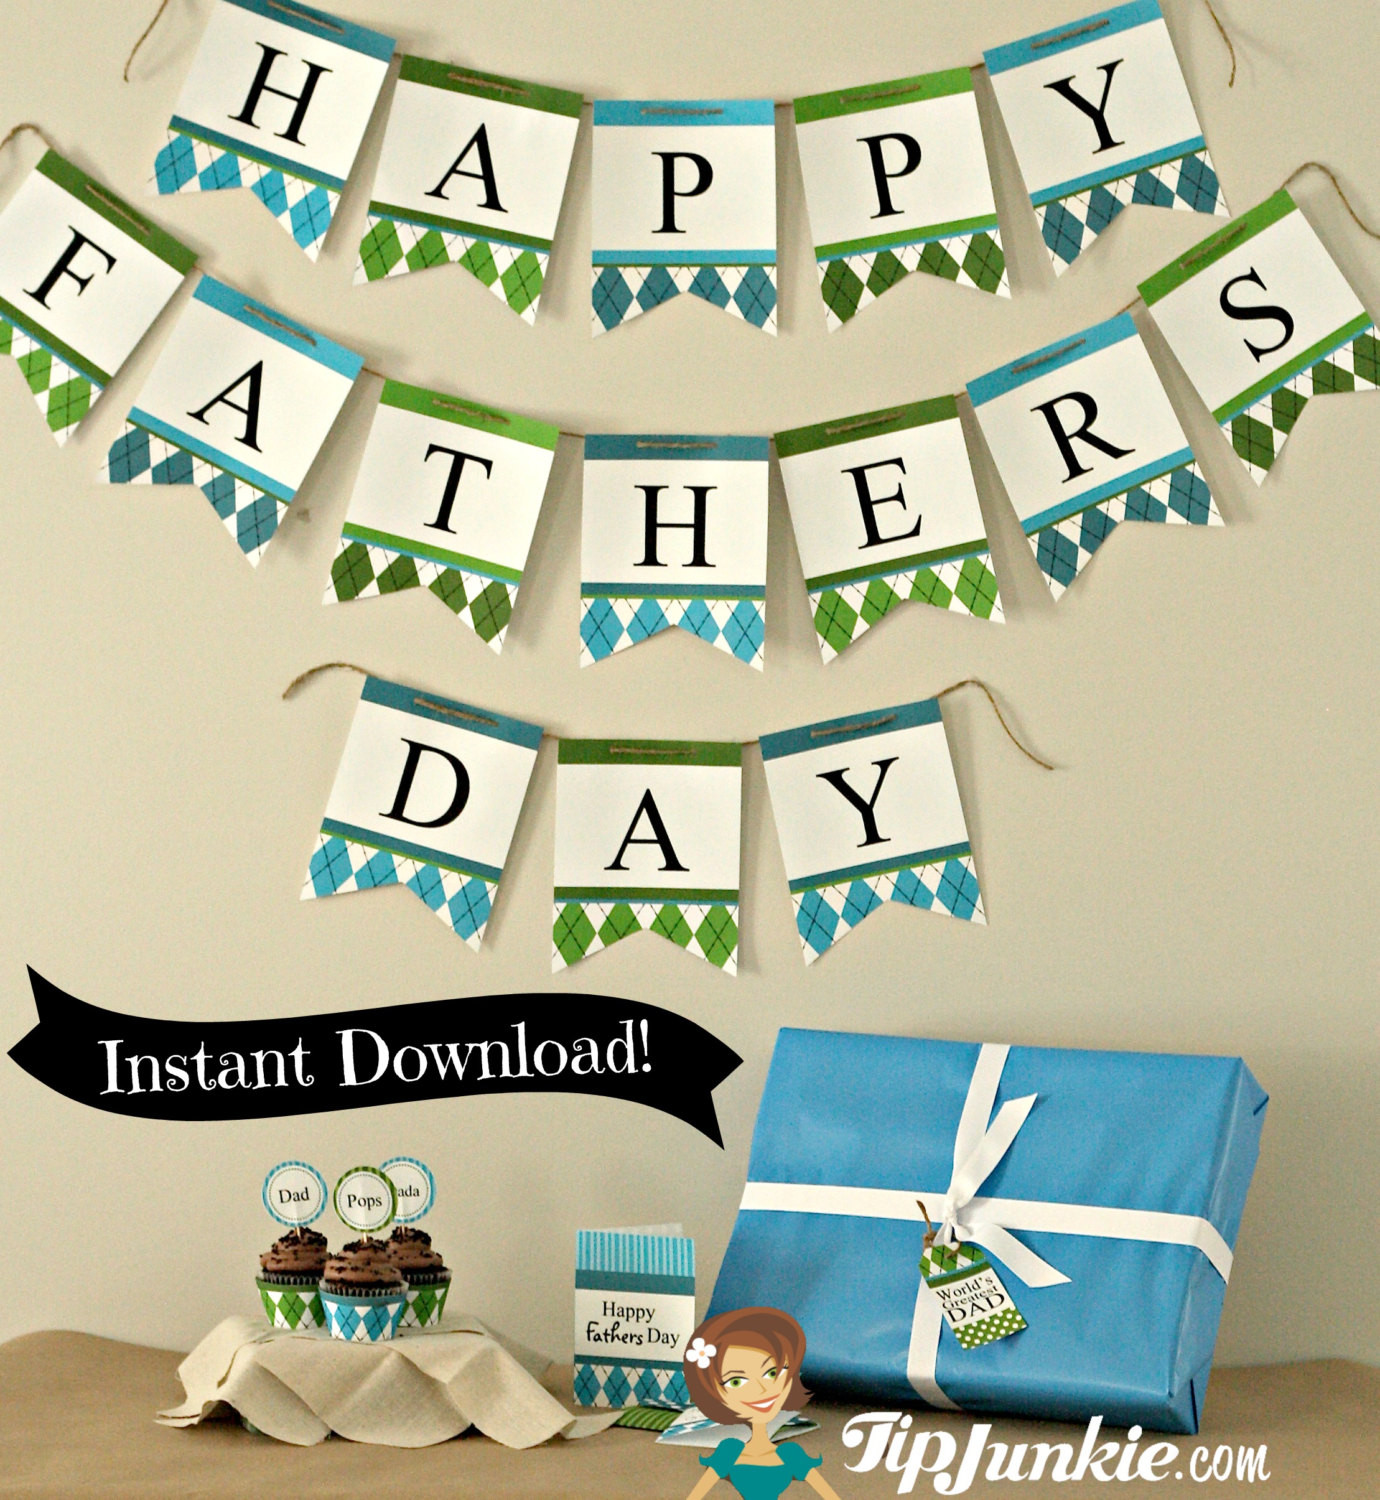 Fathers Day Party Decorations
 7 Father s Day Party Decorations Printable Cards and DIY